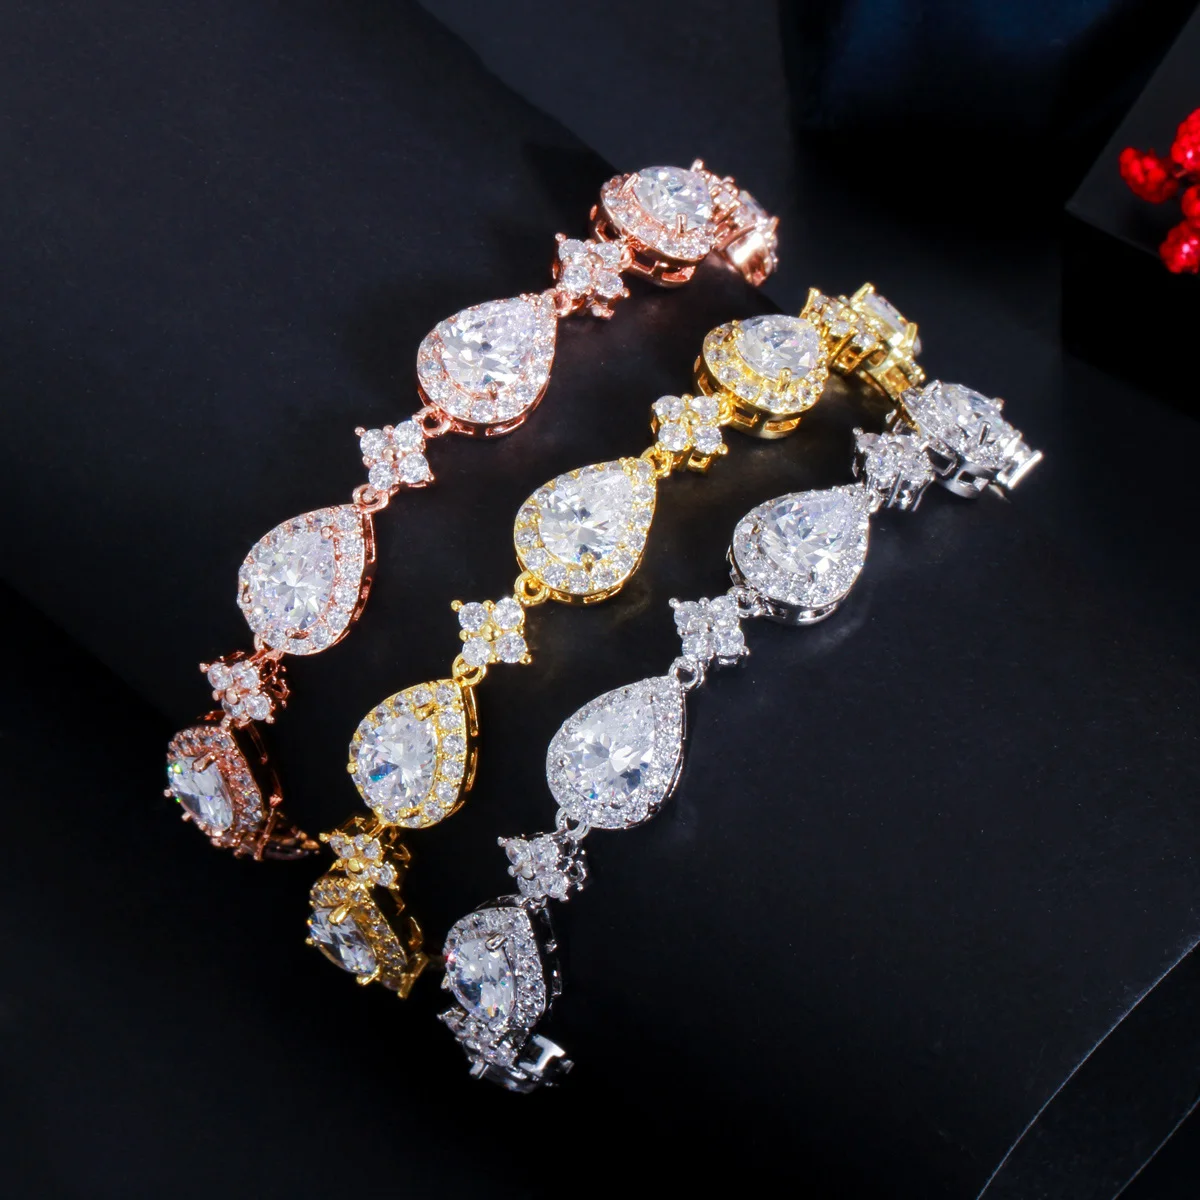 

18K Gold Plated Silver Color Women Jewelry Pear Shape Stunning Icy Cubic Zirconia Gift Bracelet for Engagement Party Accessory